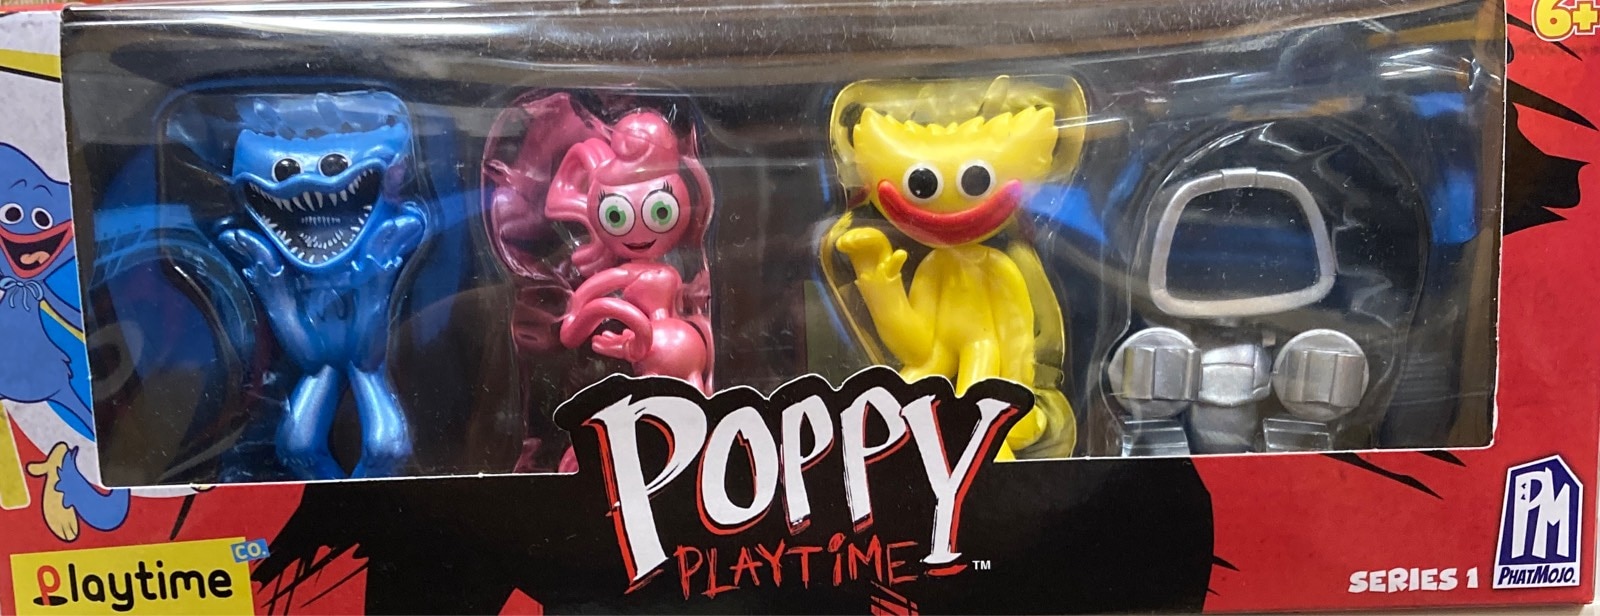 Official Poppy Playtime Metallic Collectible Figure Pack Series 1